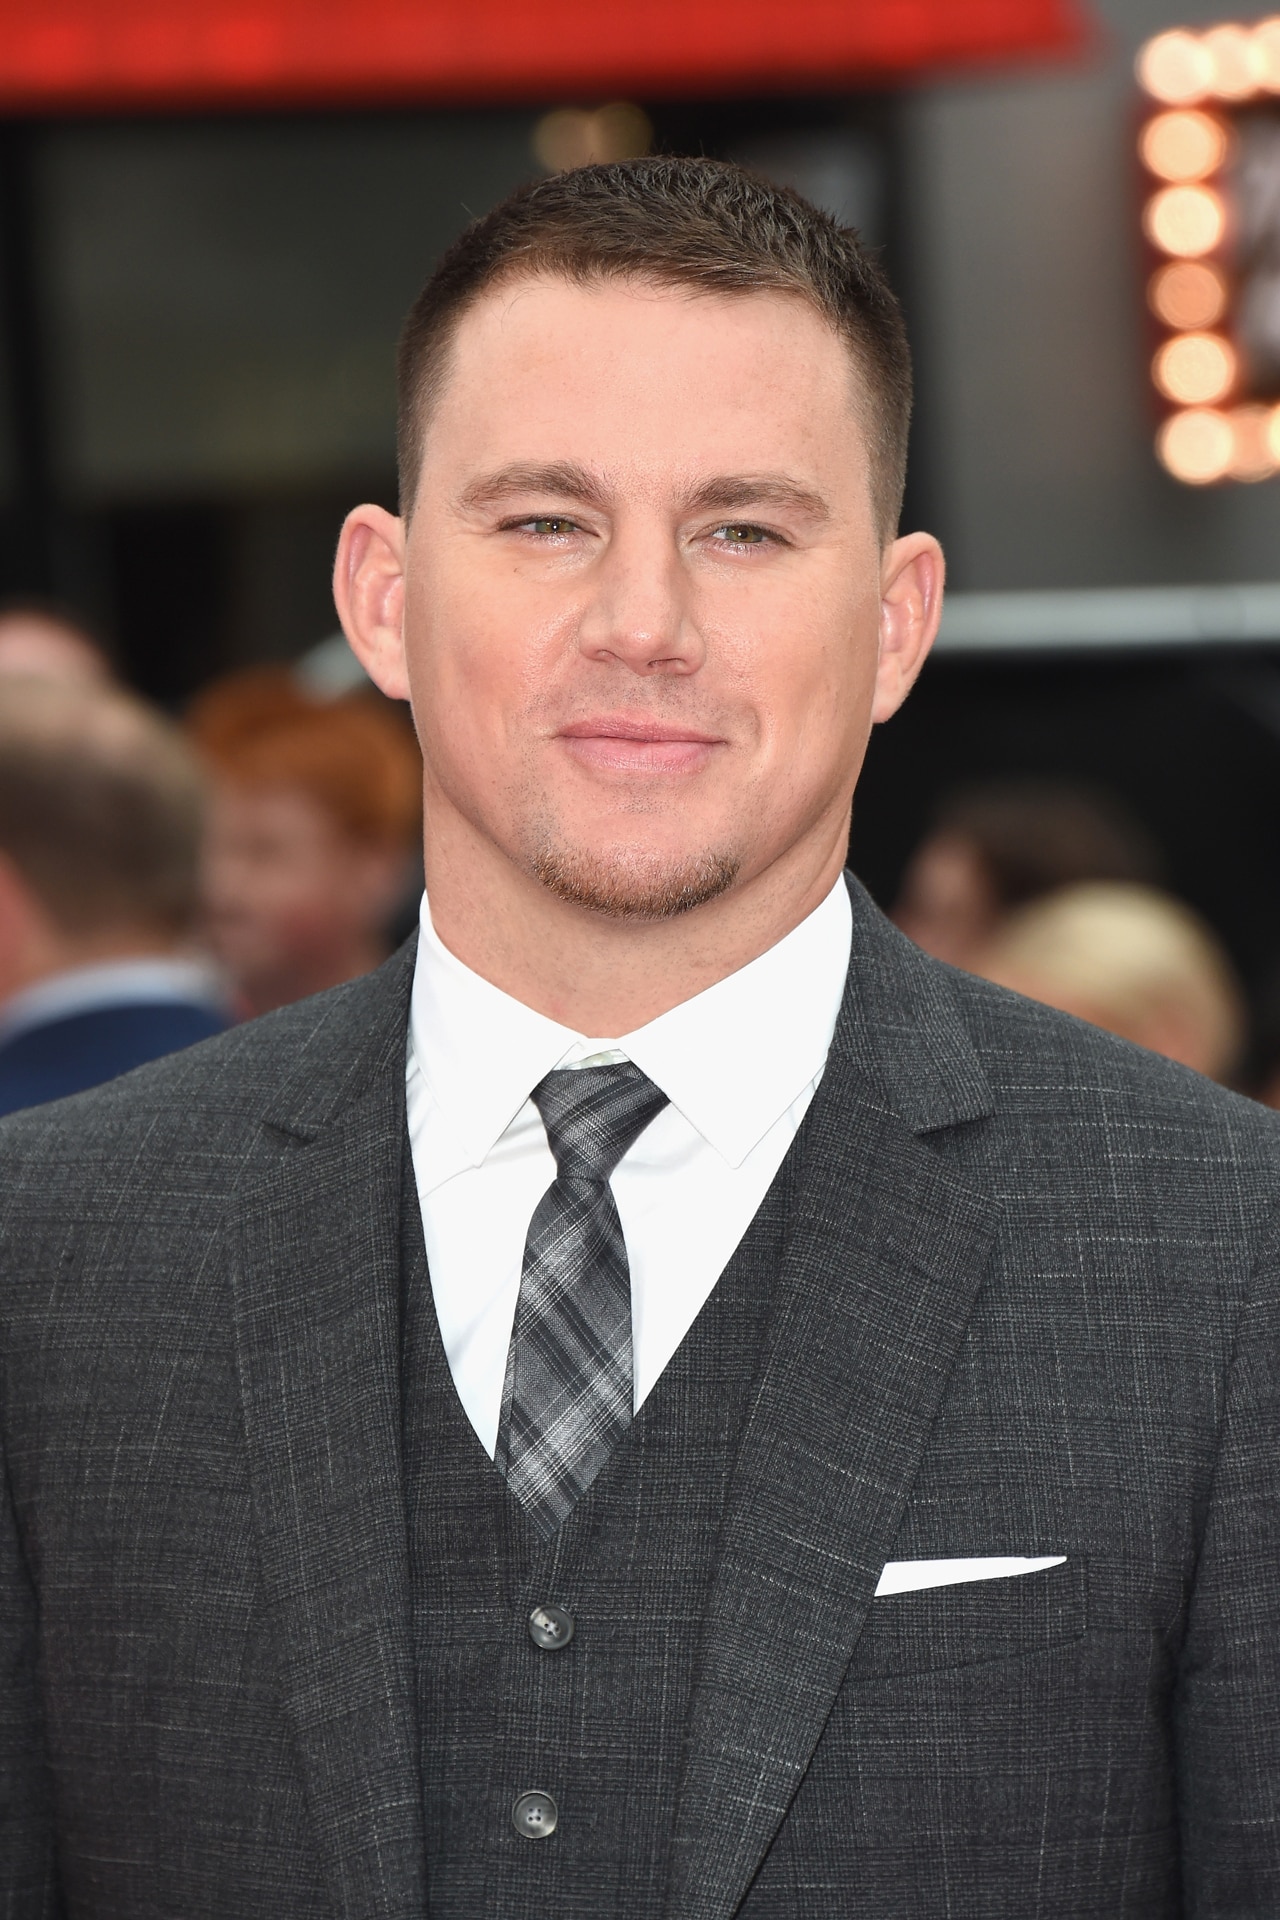 <h2>Channing Tatum</h2><p>Channing Tatum starred in the poorly reviewed 2009 film <i>G.I. Joe: Rise of the Cobra</i>, a role he has voiced his regret playing. Talking on <a href="http://variety.com/2015/film/news/channing-tatum-g-i-joe-rise-of-the-cobra-1201526536/" target="_blank" rel="noopener">Howard Stern’s SiriusXM radio show</a> in 2015, the actor confessed his dislike for the movie his contract with Paramount forced him to be part of.   </p>